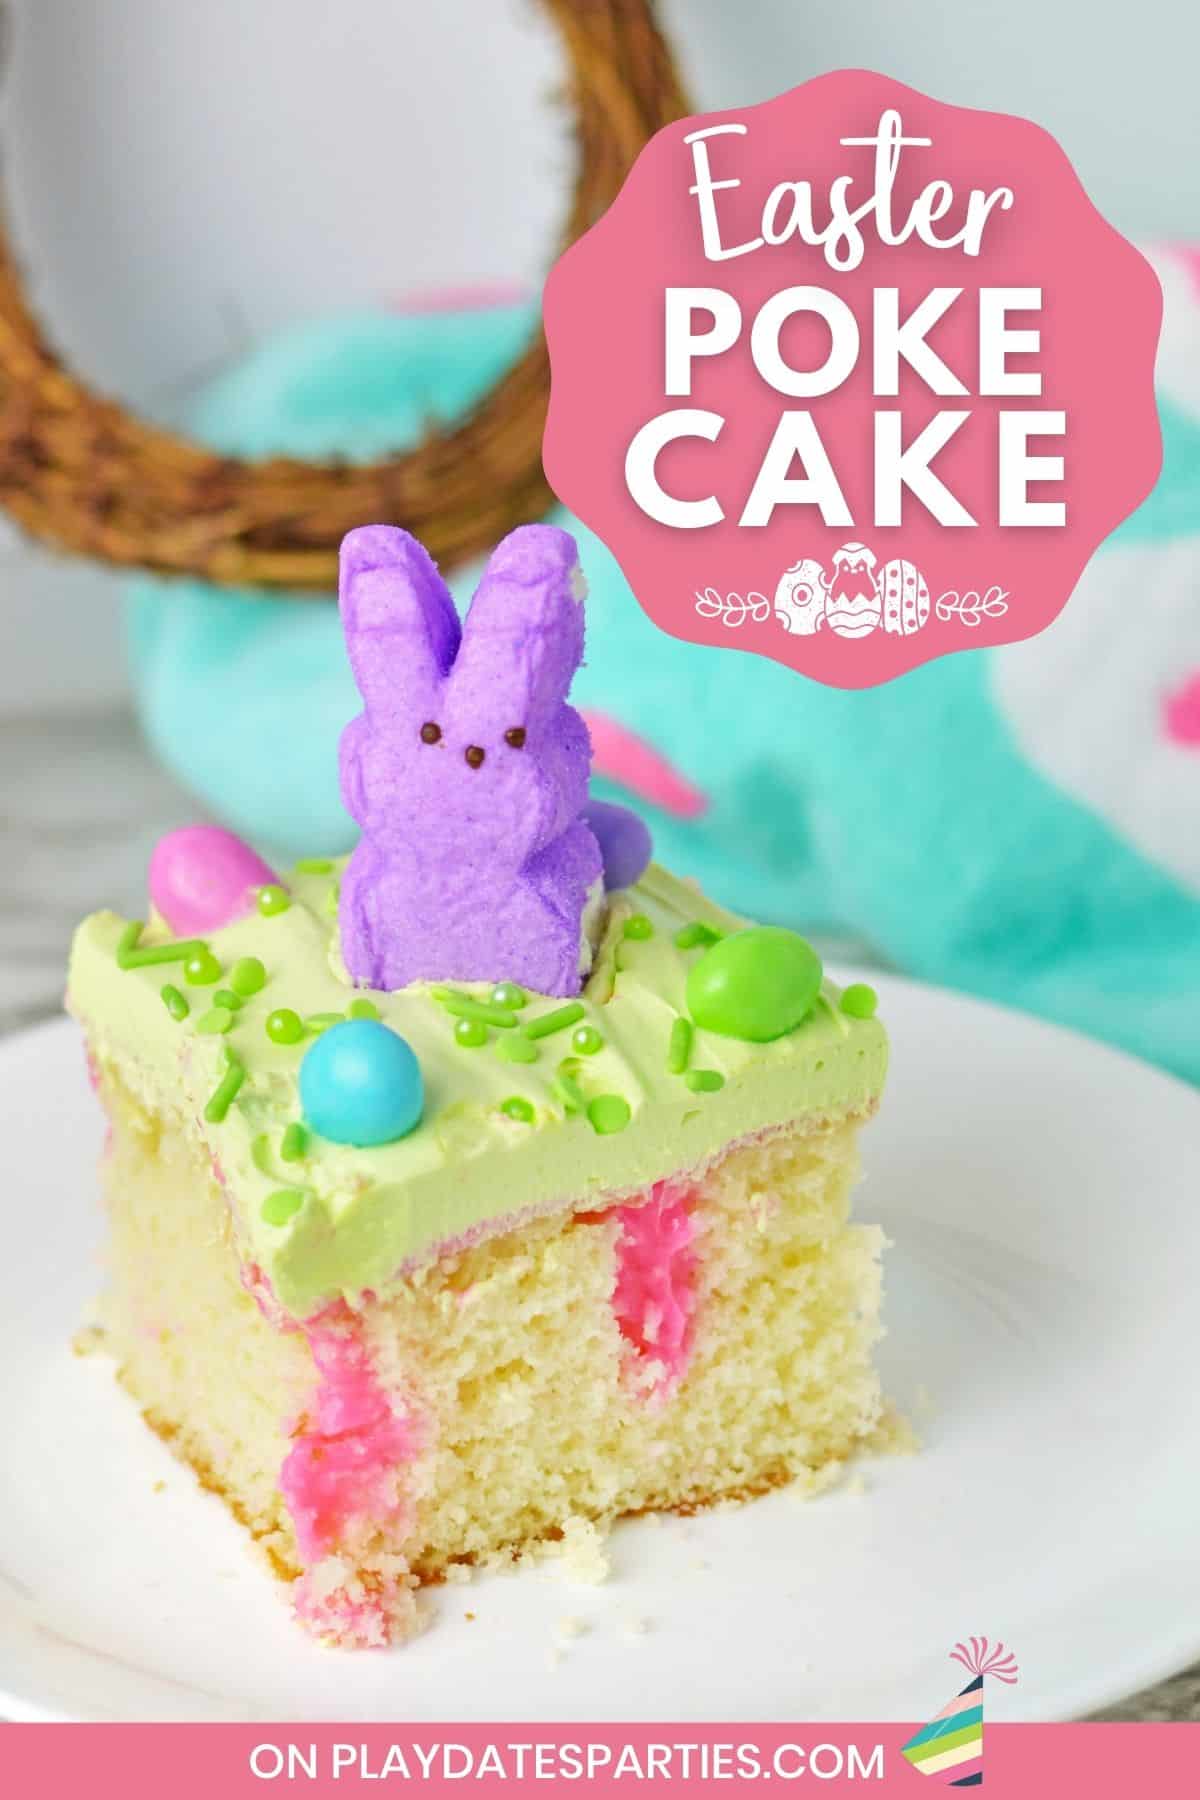 A slice of colorful Easter poke cake with peeps, green sprinkles, and M&Ms.